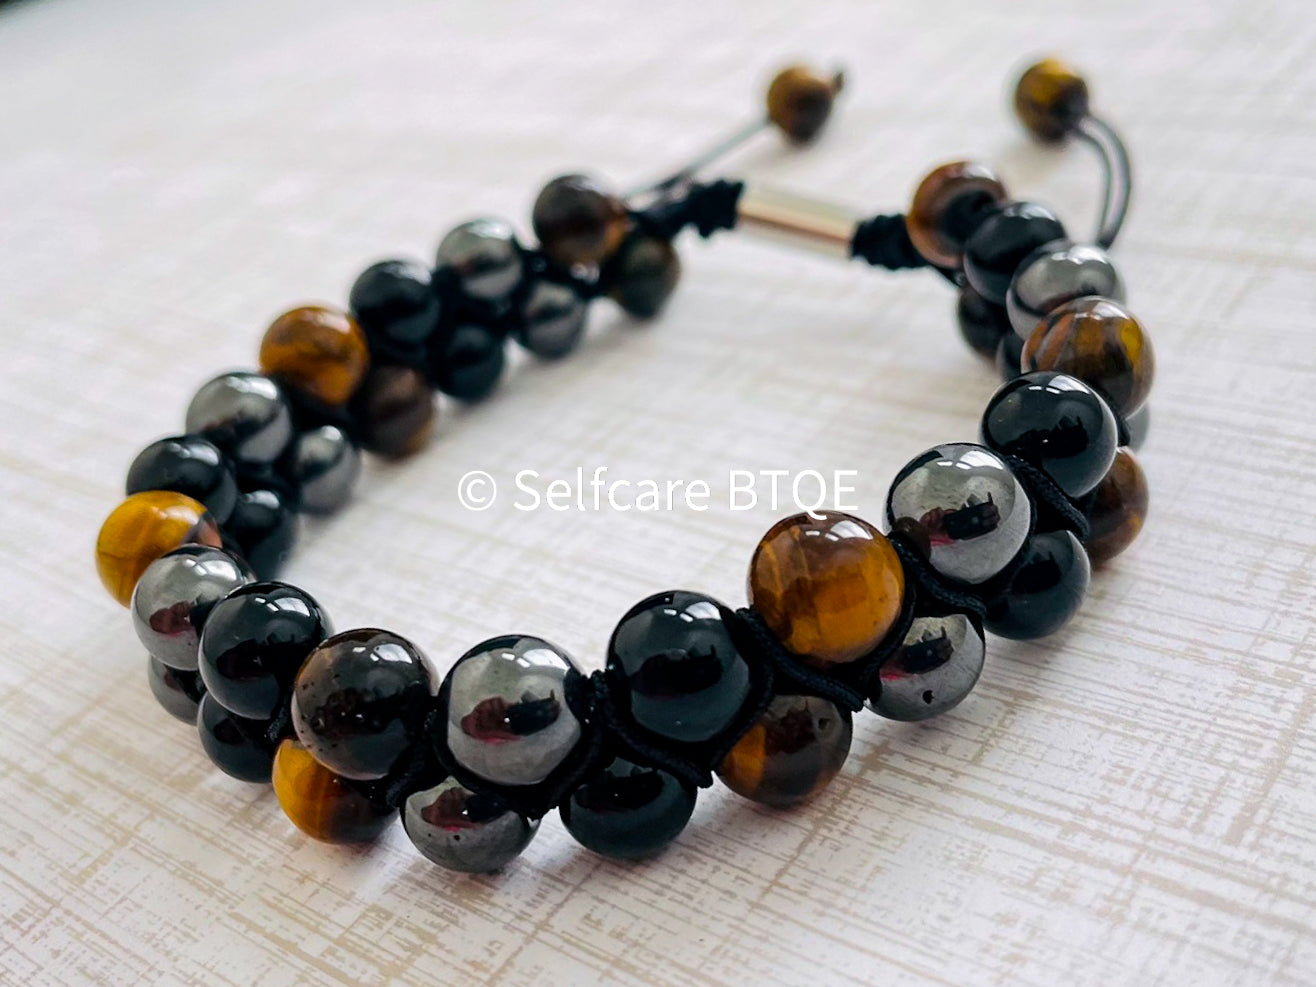 Triple Protection Bracelet - Double Layer with Yellow Tiger's Eye, Hematite and Black Onyx Stones | Mens | Womens | 8mm